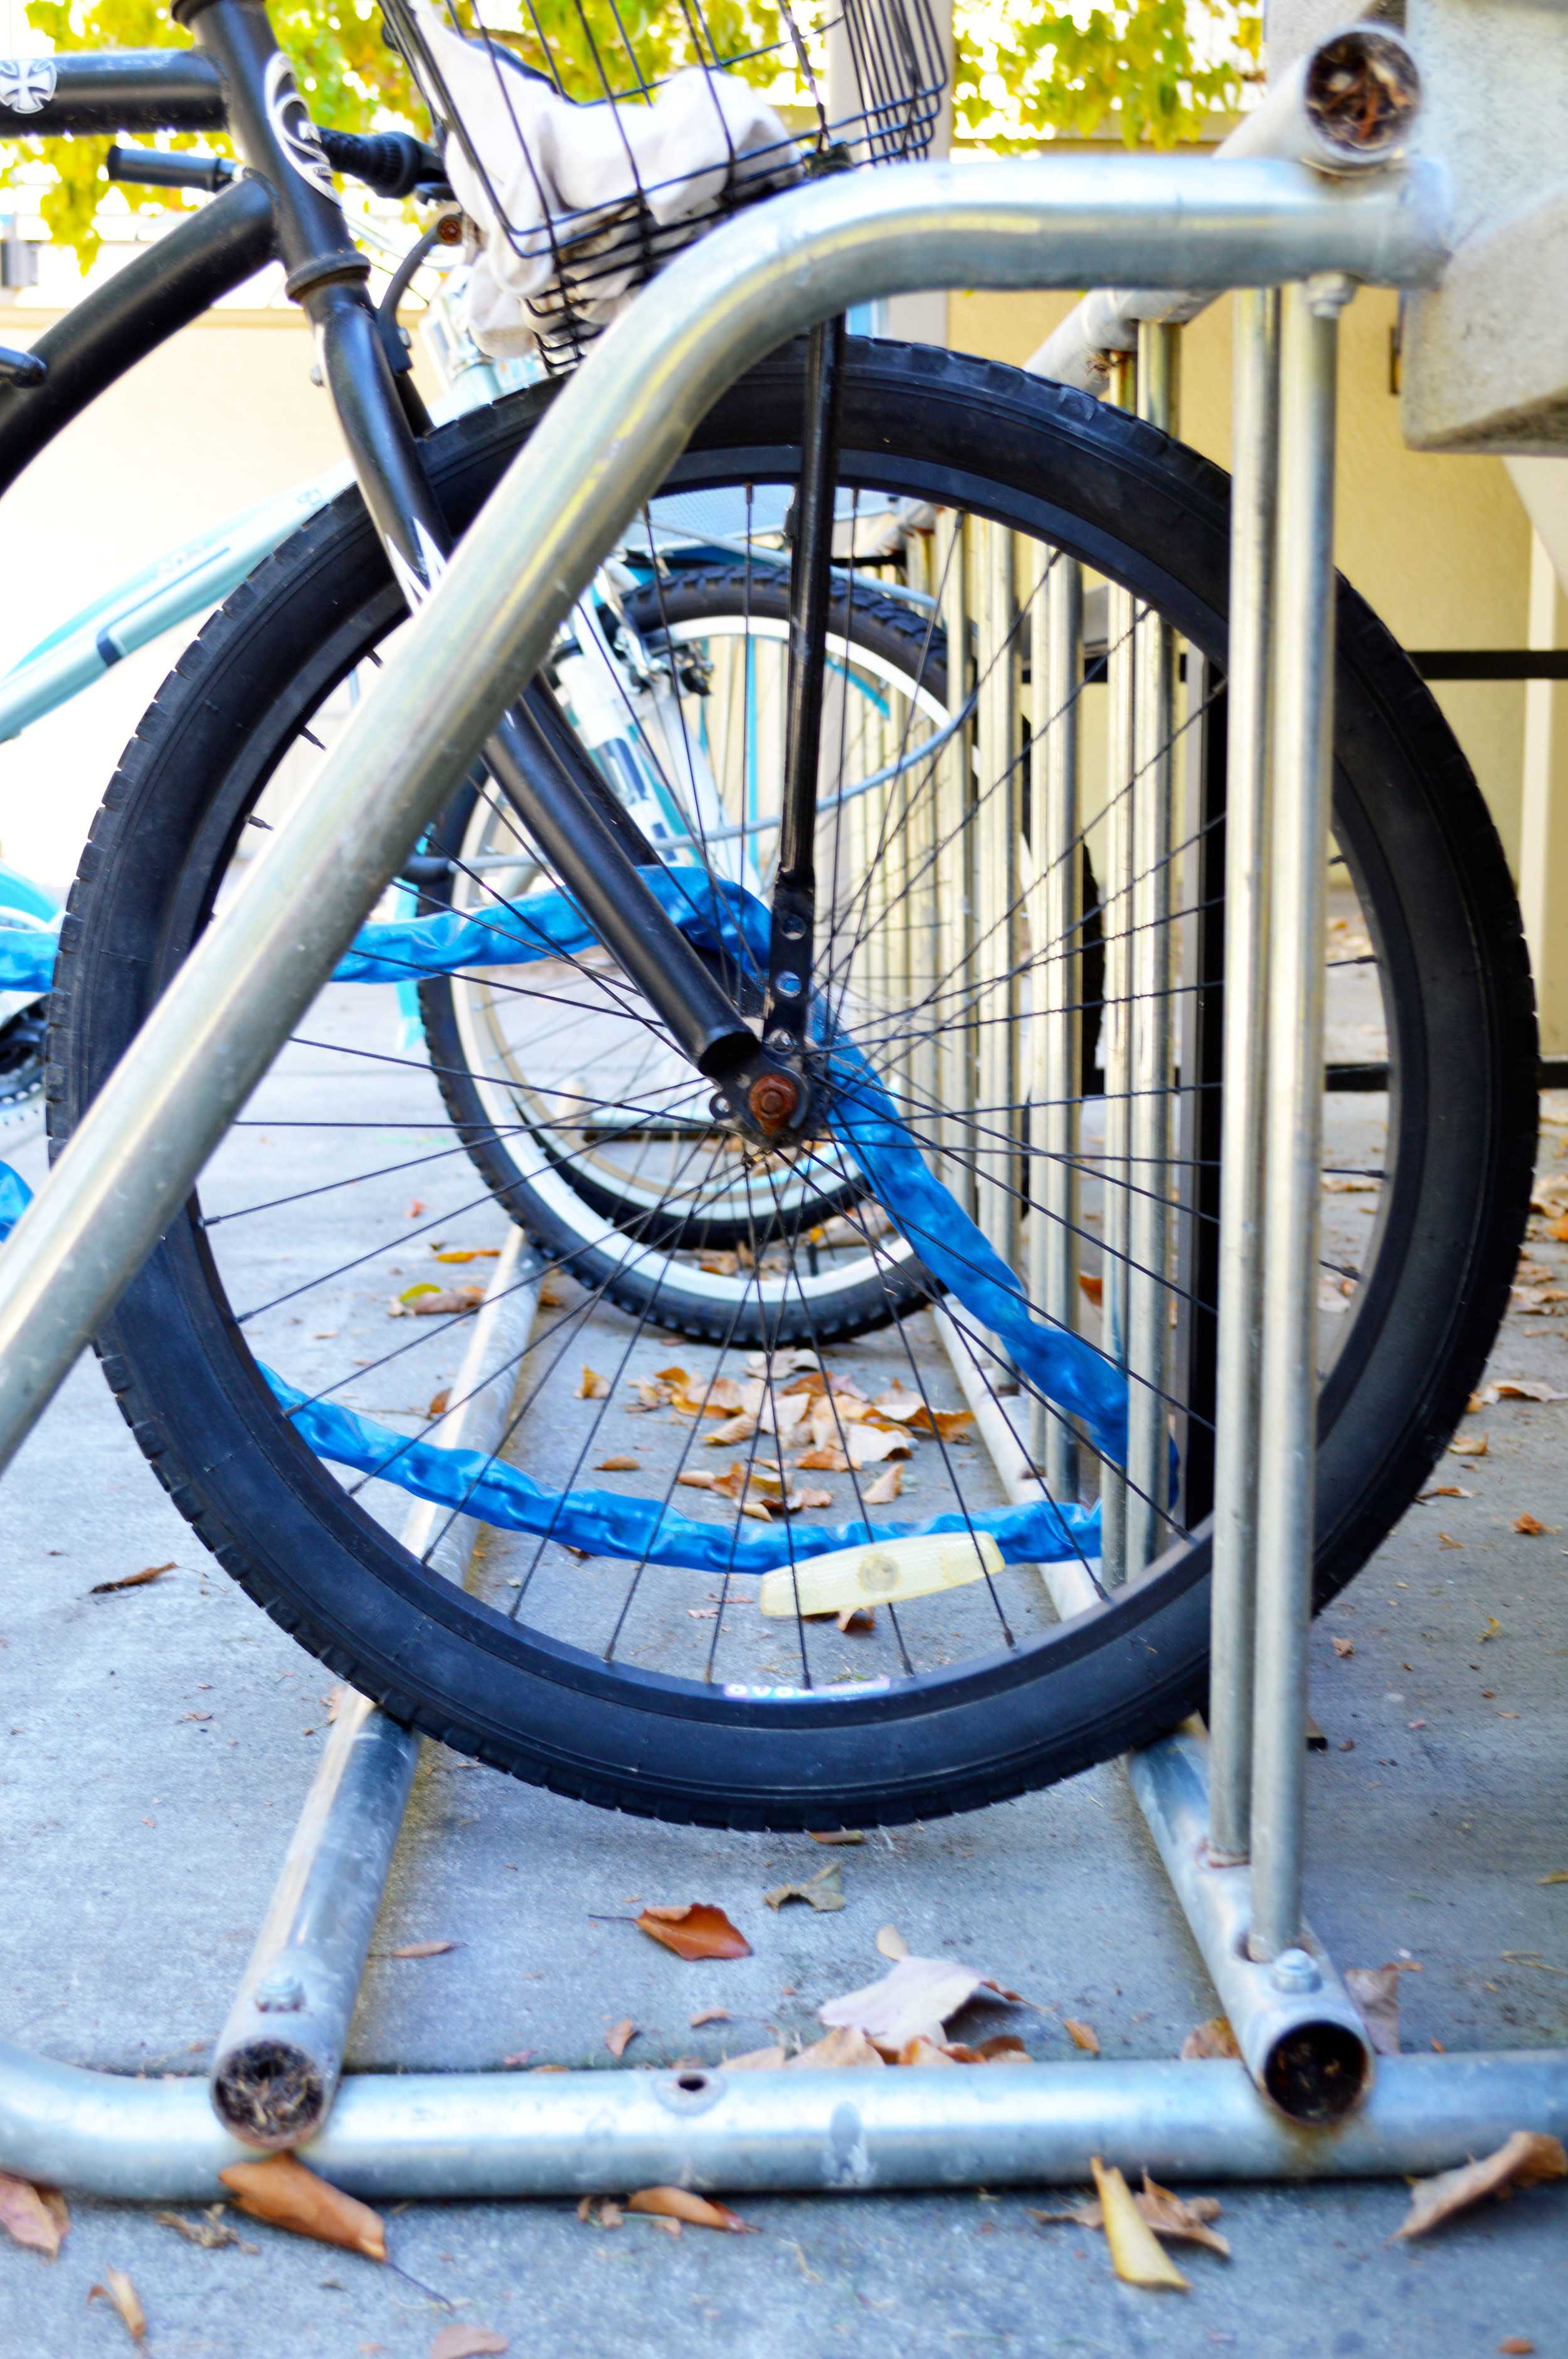 The start of a new semester brings a wave a bike thefts and car break-ins.